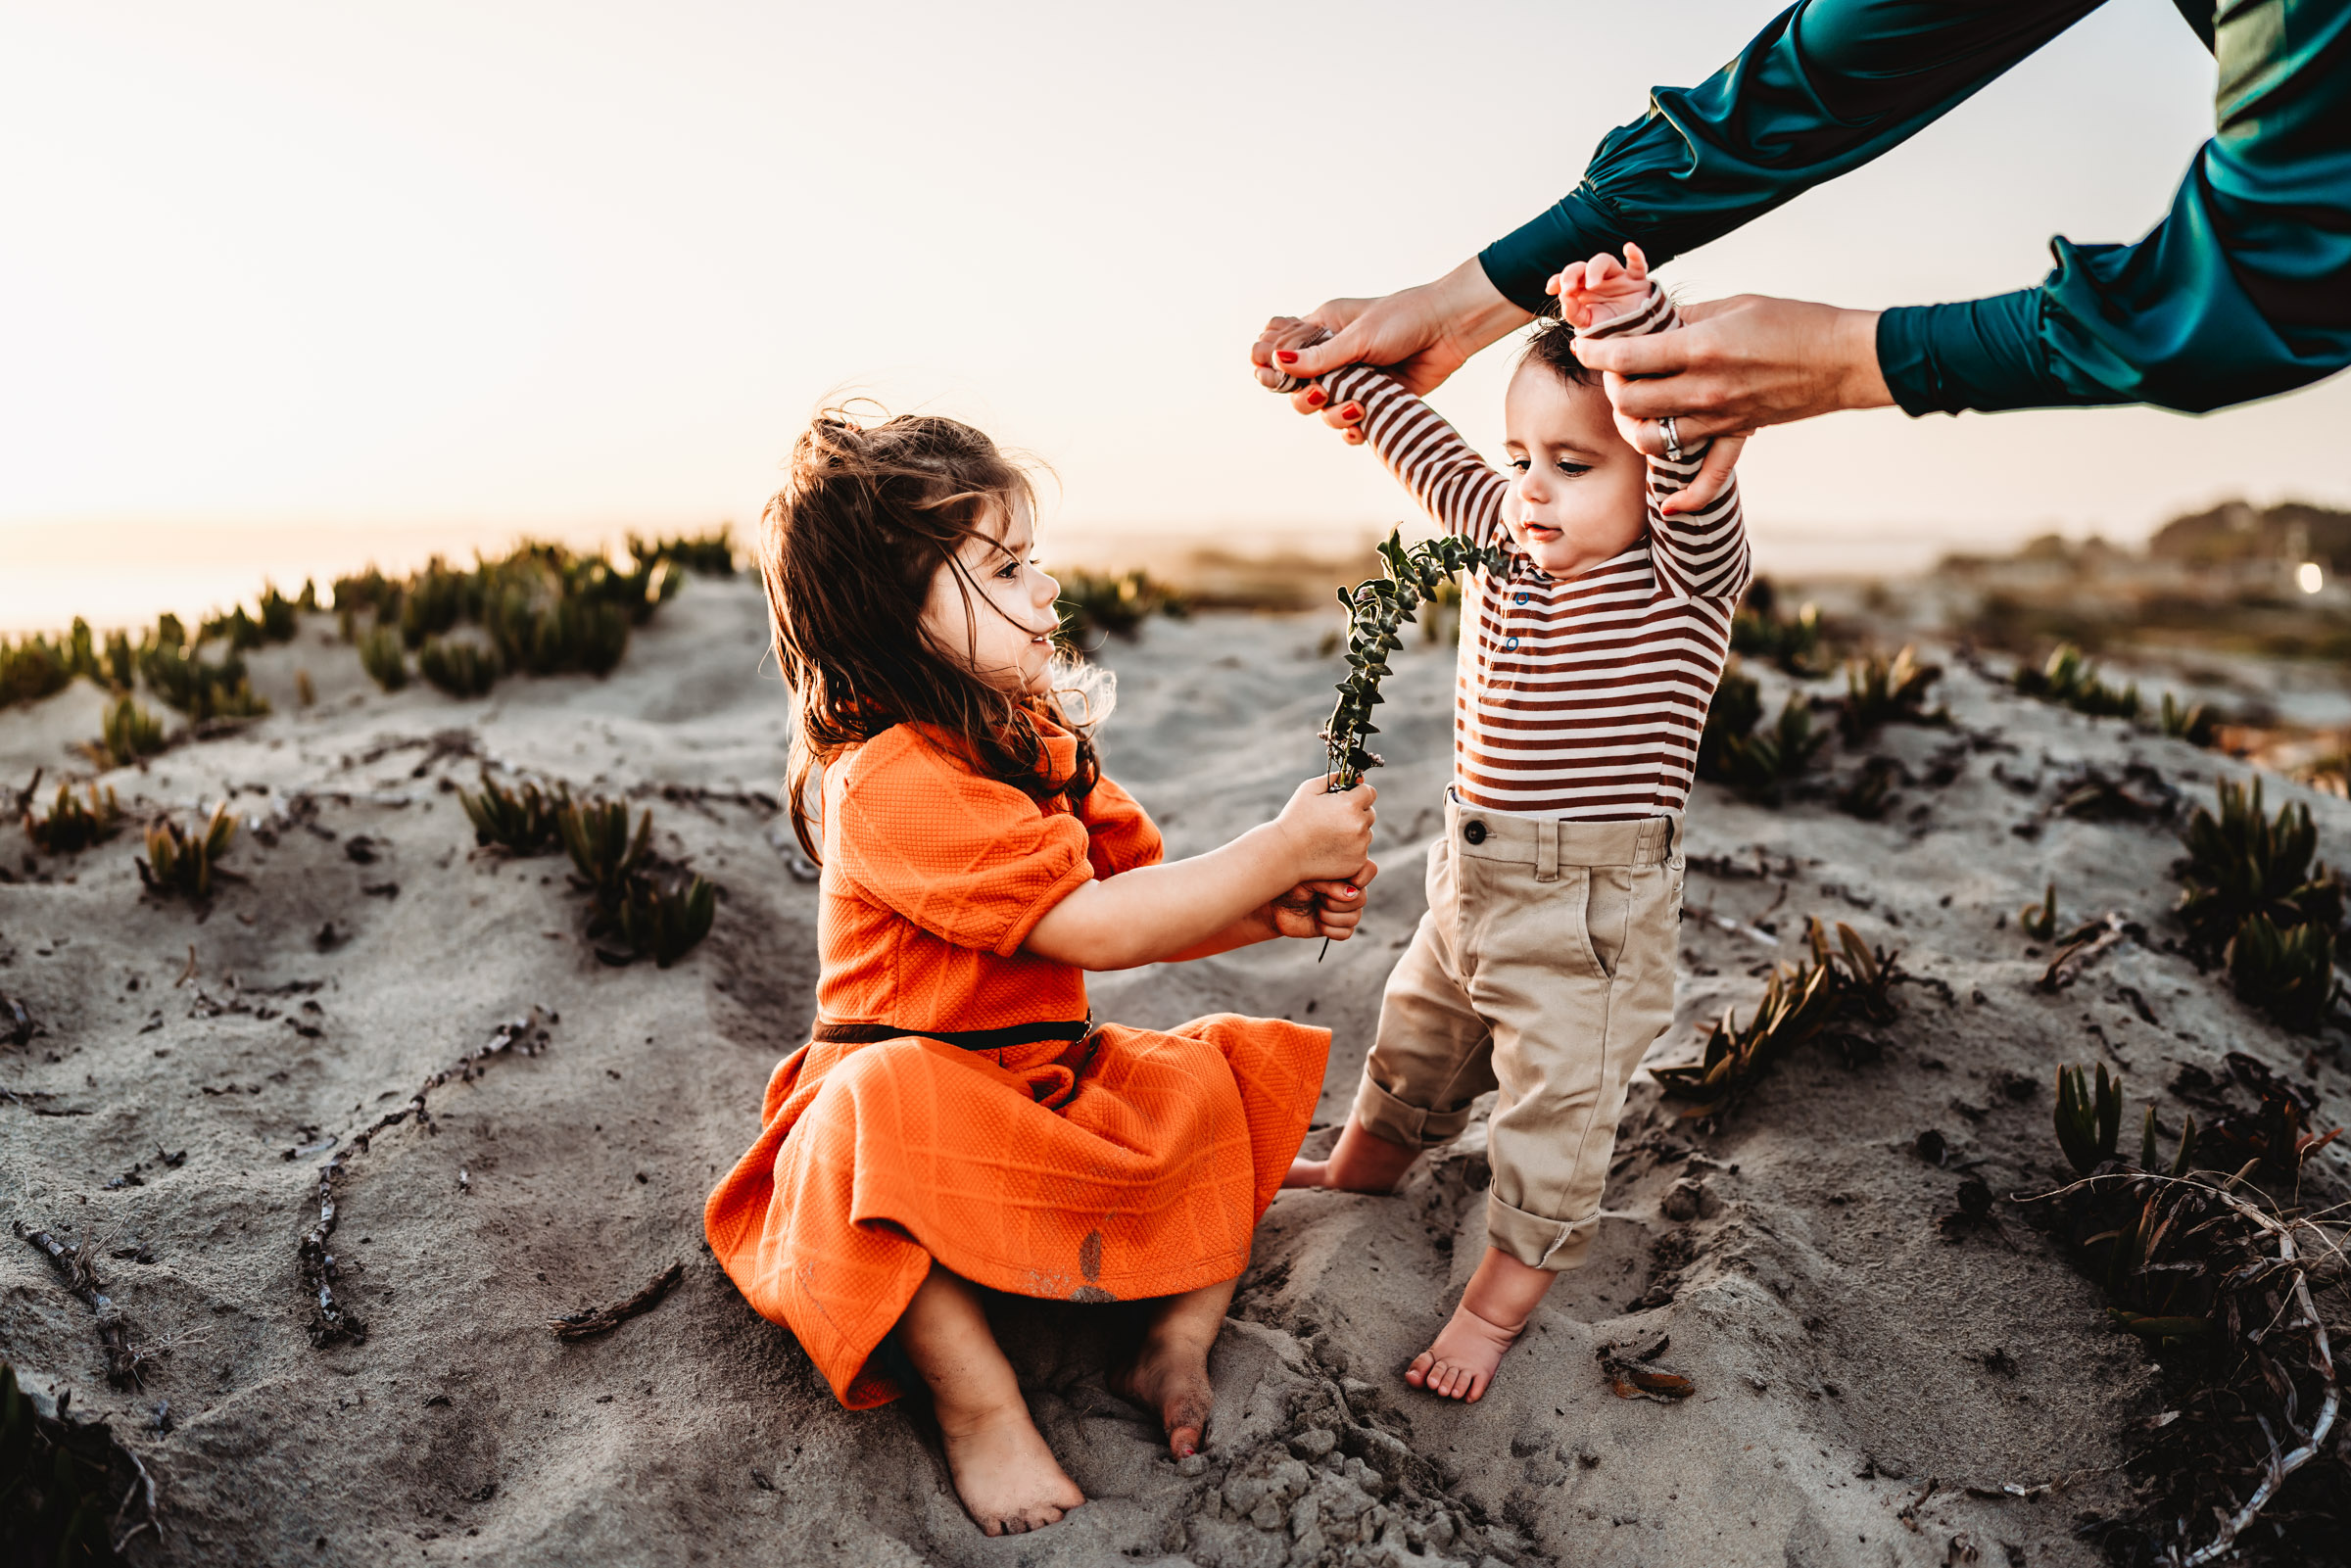 Little girl sitting on a sand dune and giving her baby brother a flower during a lifestyle family photography session on Coronado Beach.